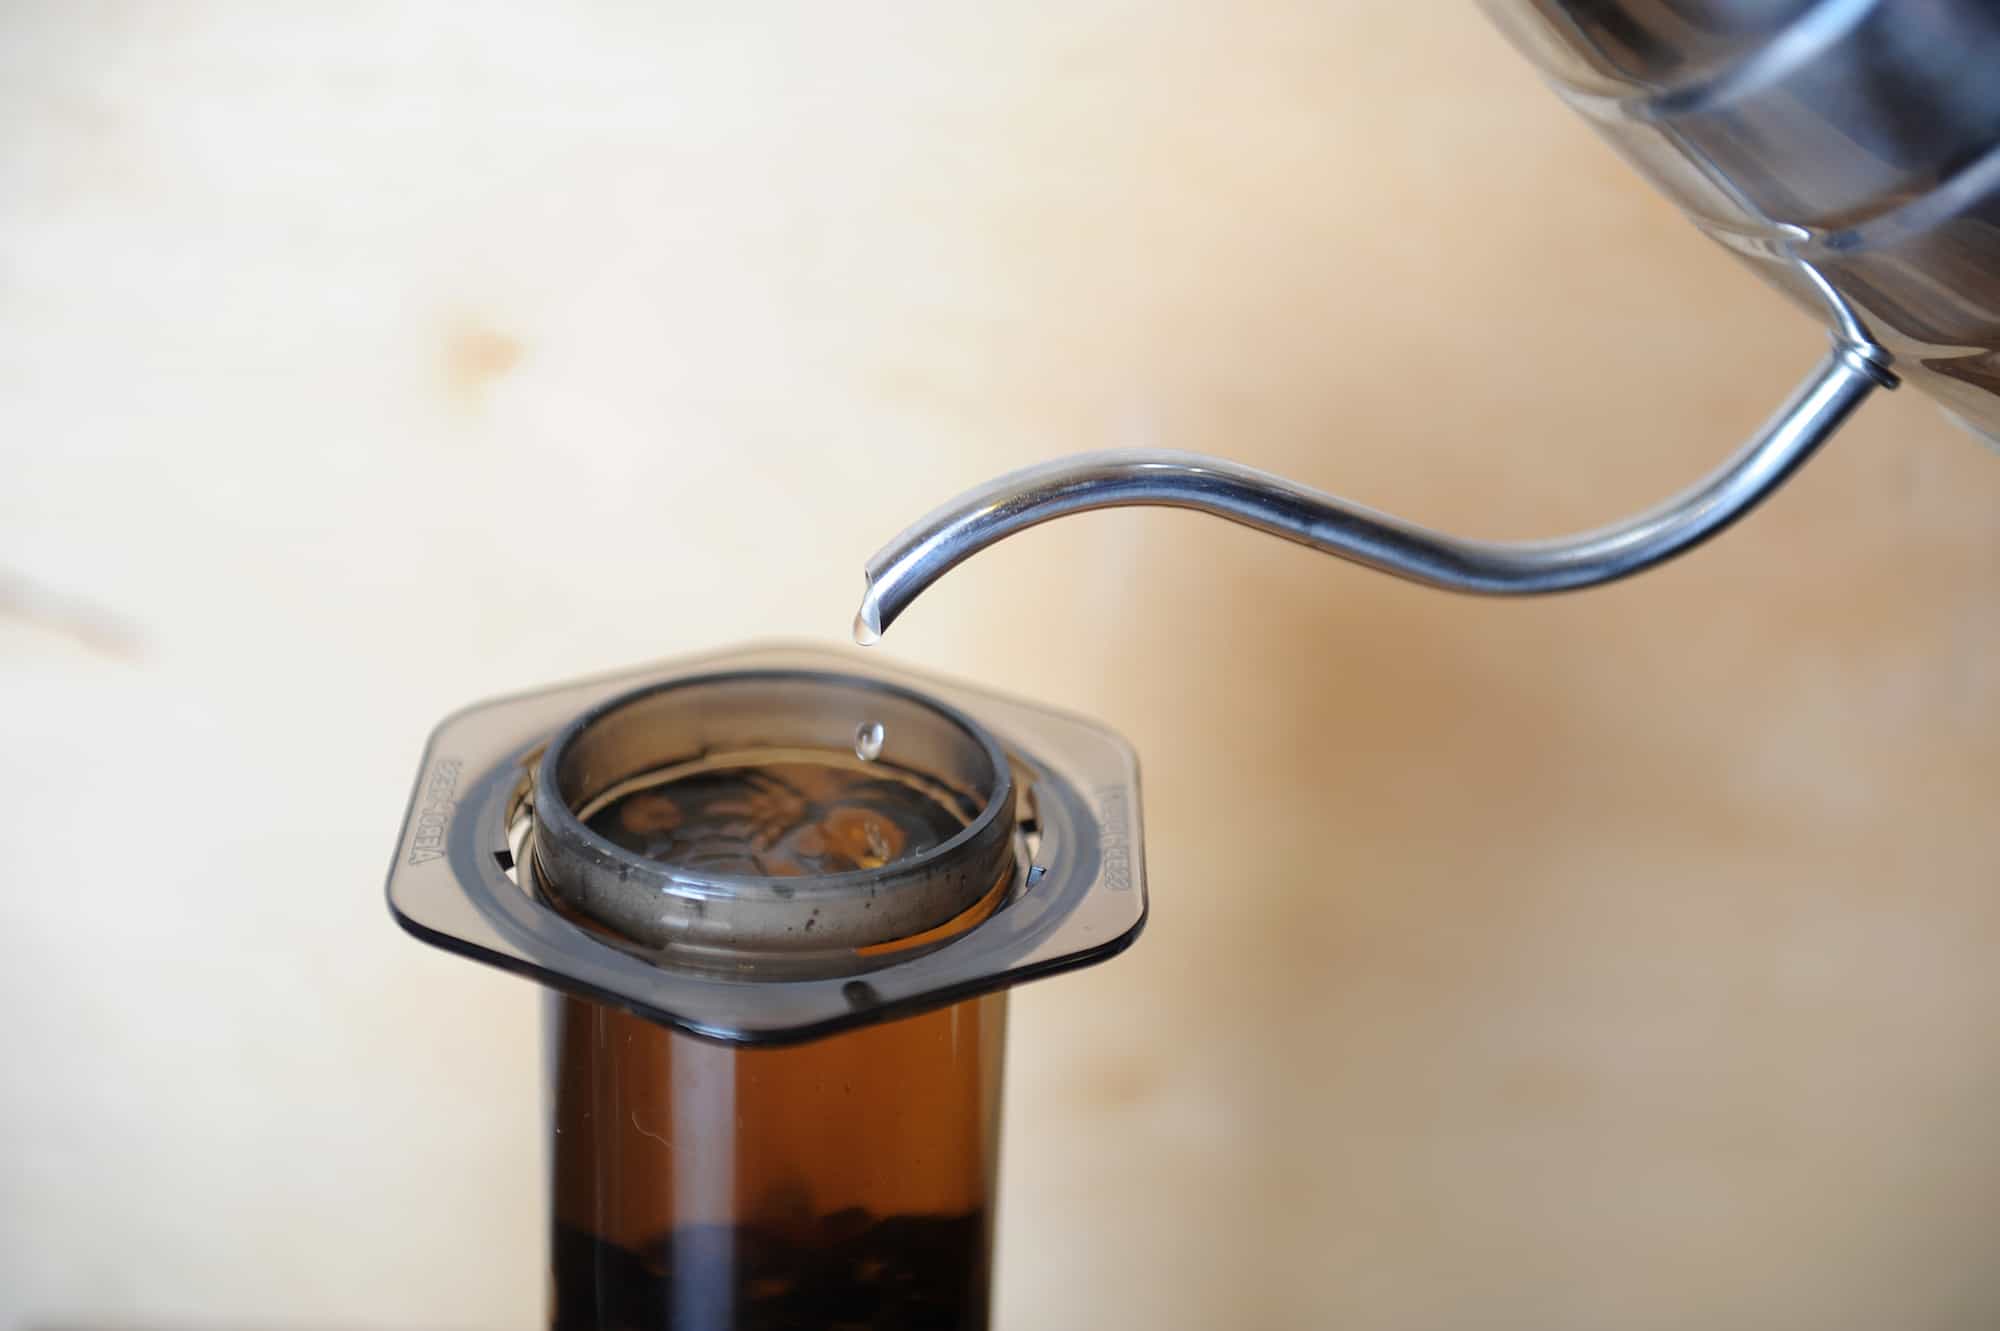 aeropress-pouring-from-gooseneck-kettle.